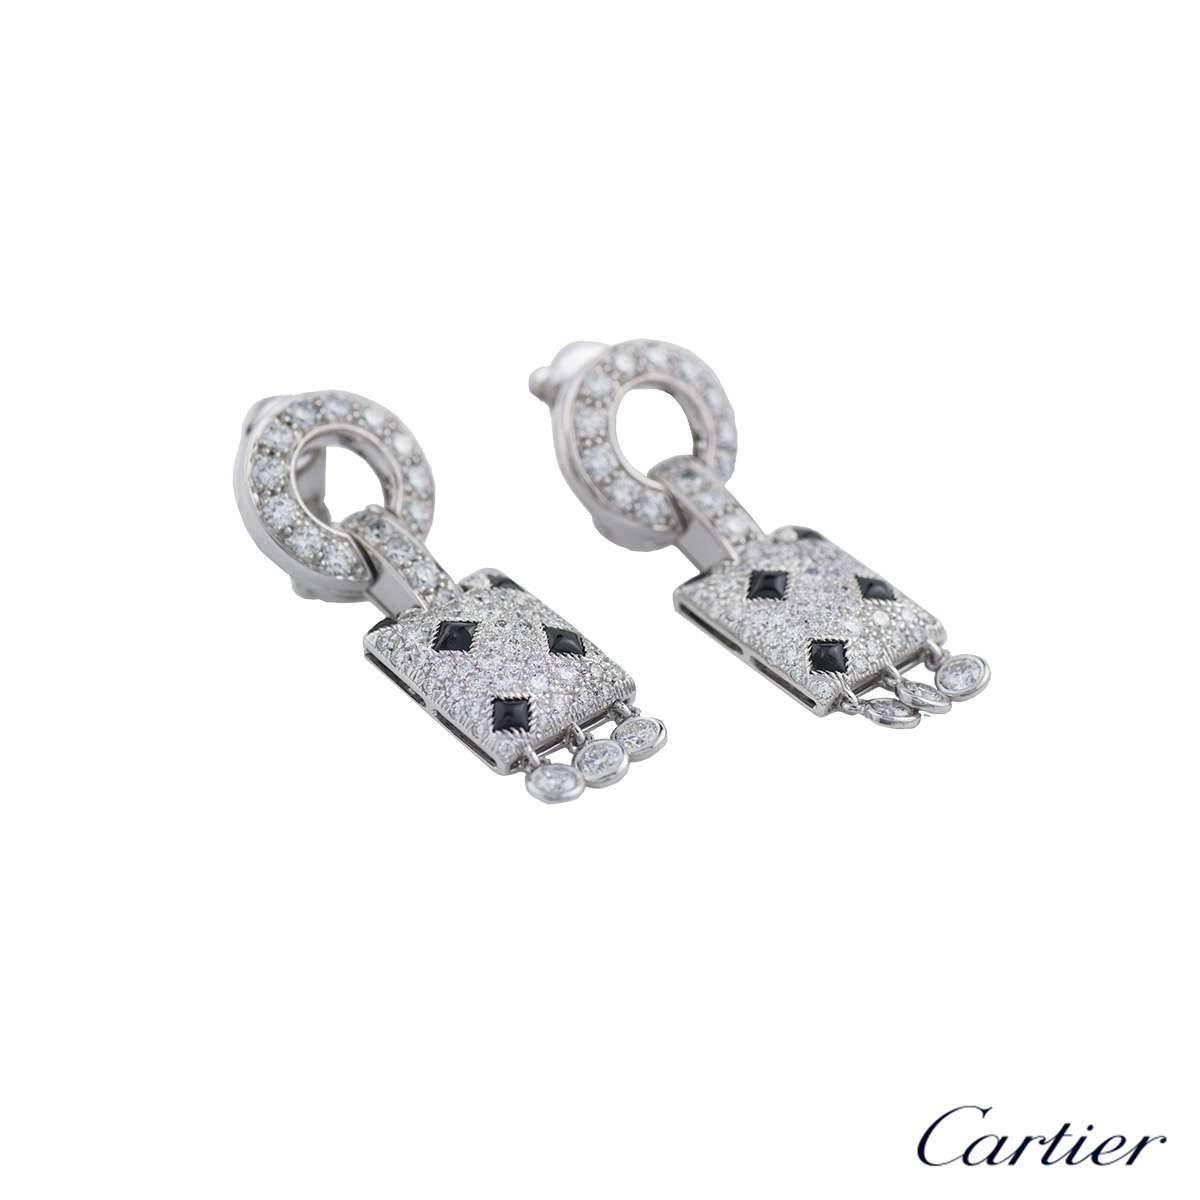 A stunning pair of 18k white gold earrings from the Panthere de Cartier collection. The earrings feature a diamond set circular motif with a bar link connecting to a rectangular diamond and onyx set panel, suspending three freely moving diamonds.